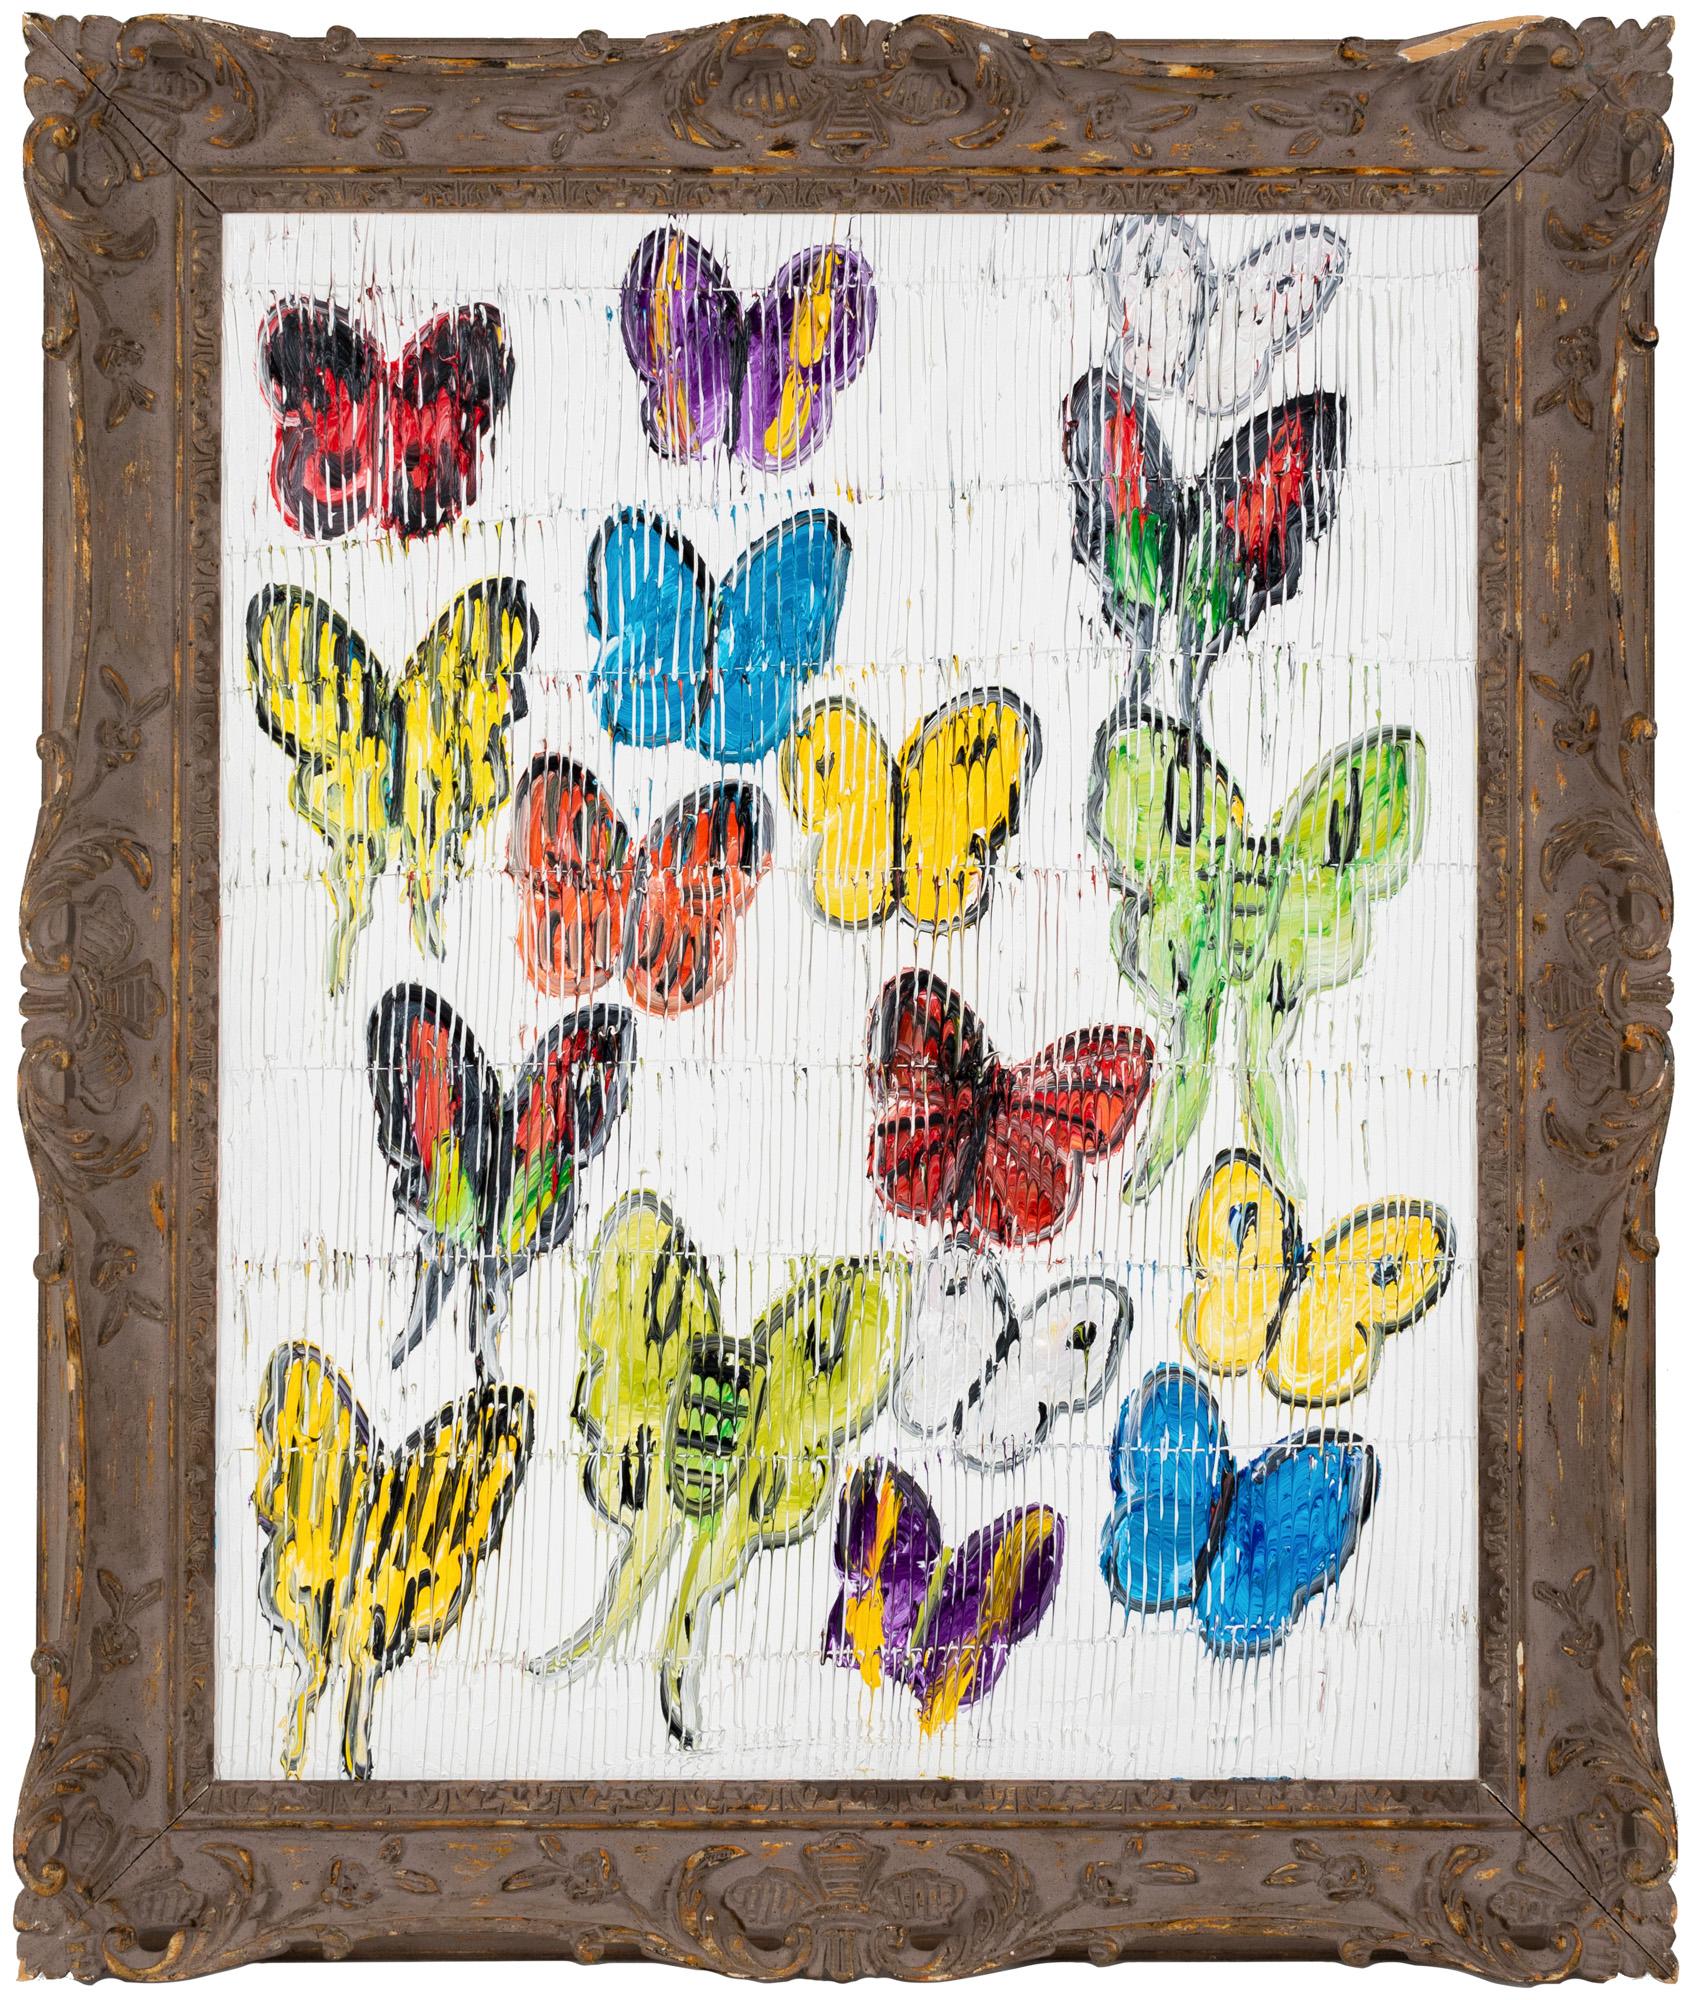 "Summerland" is a neo-expressionist framed oil on canvas depicting a bundle of butterflies. The artist's technique of scoring thousands of individual lines into the thick paint adds organic dimension and interest to this whimsical piece. 

This